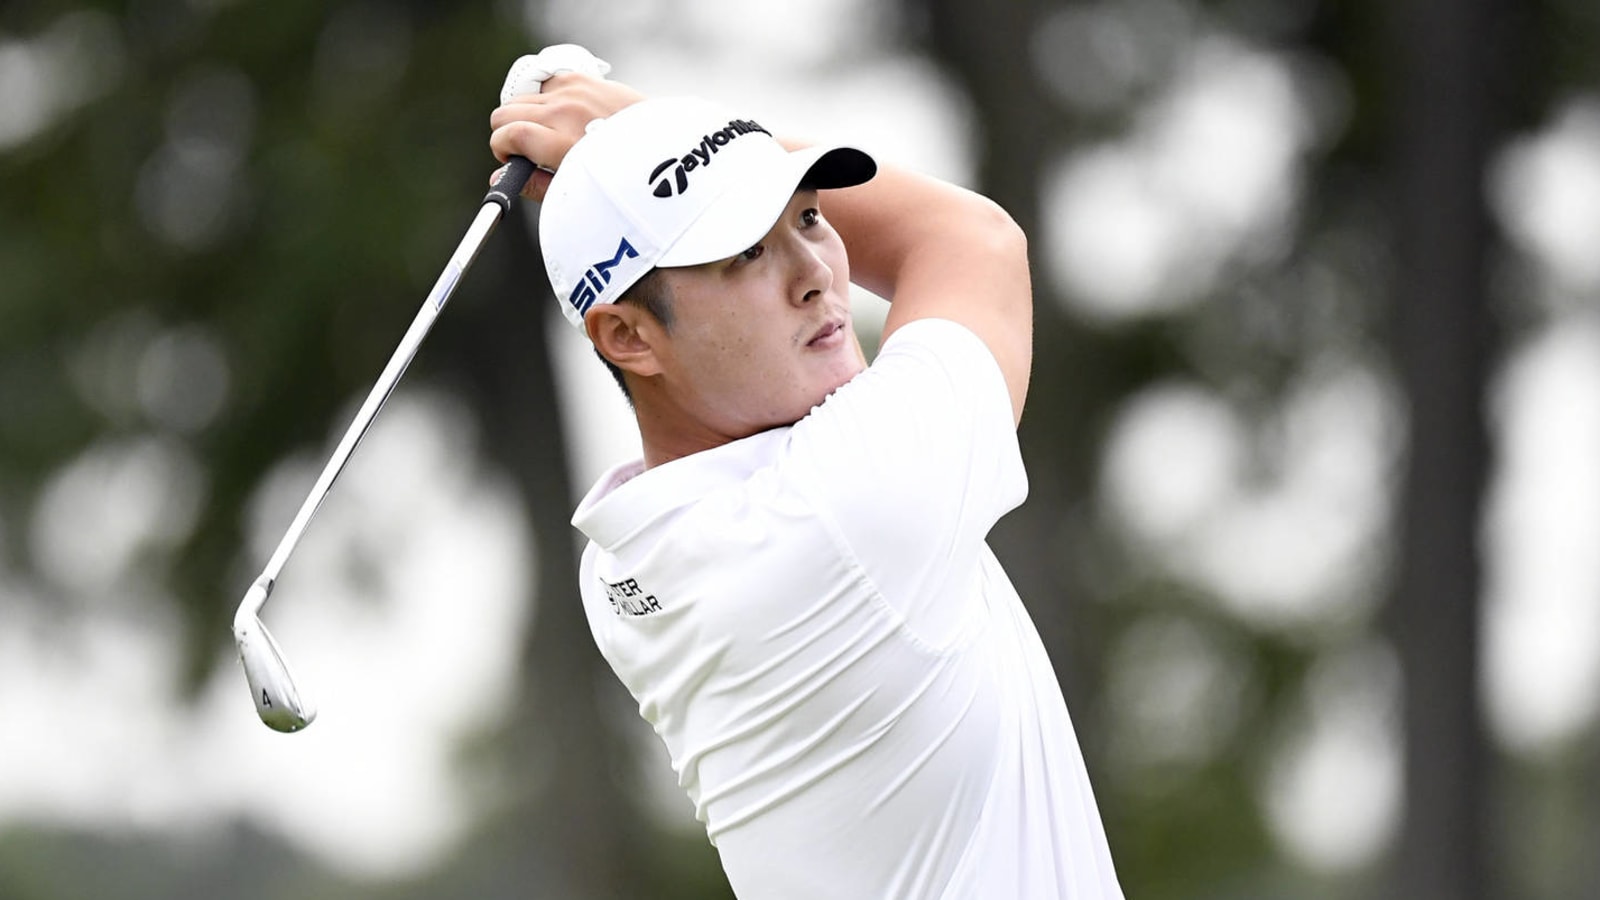 This Danny Lee six-putt video is a nightmare